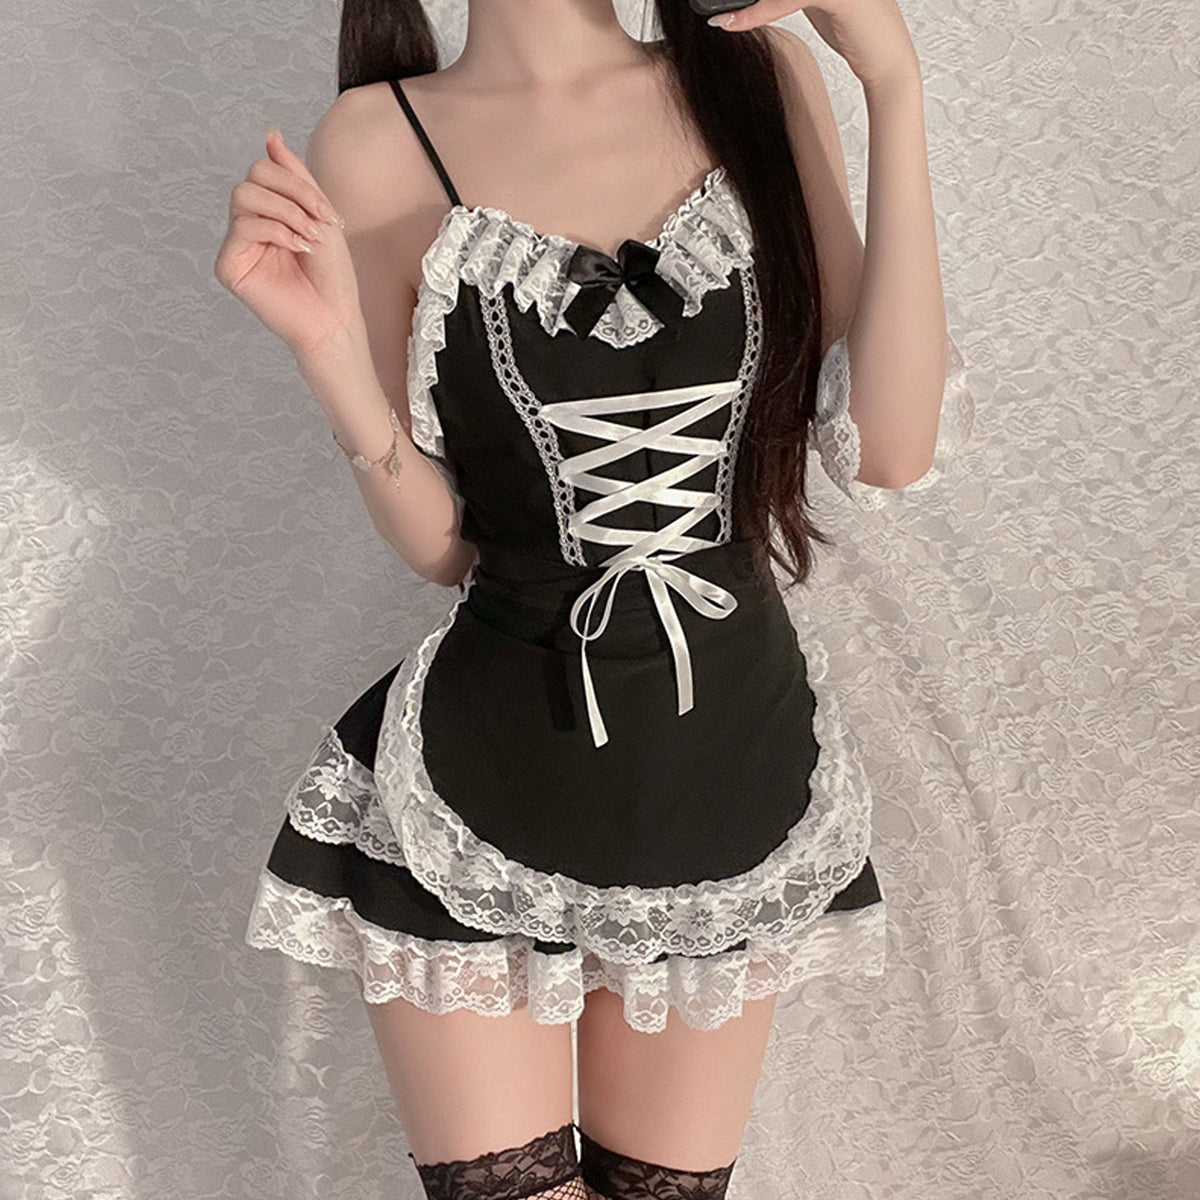 Women Cosplay Lingerie Sexy Maid Outfit Lace Trim Mesh Thong